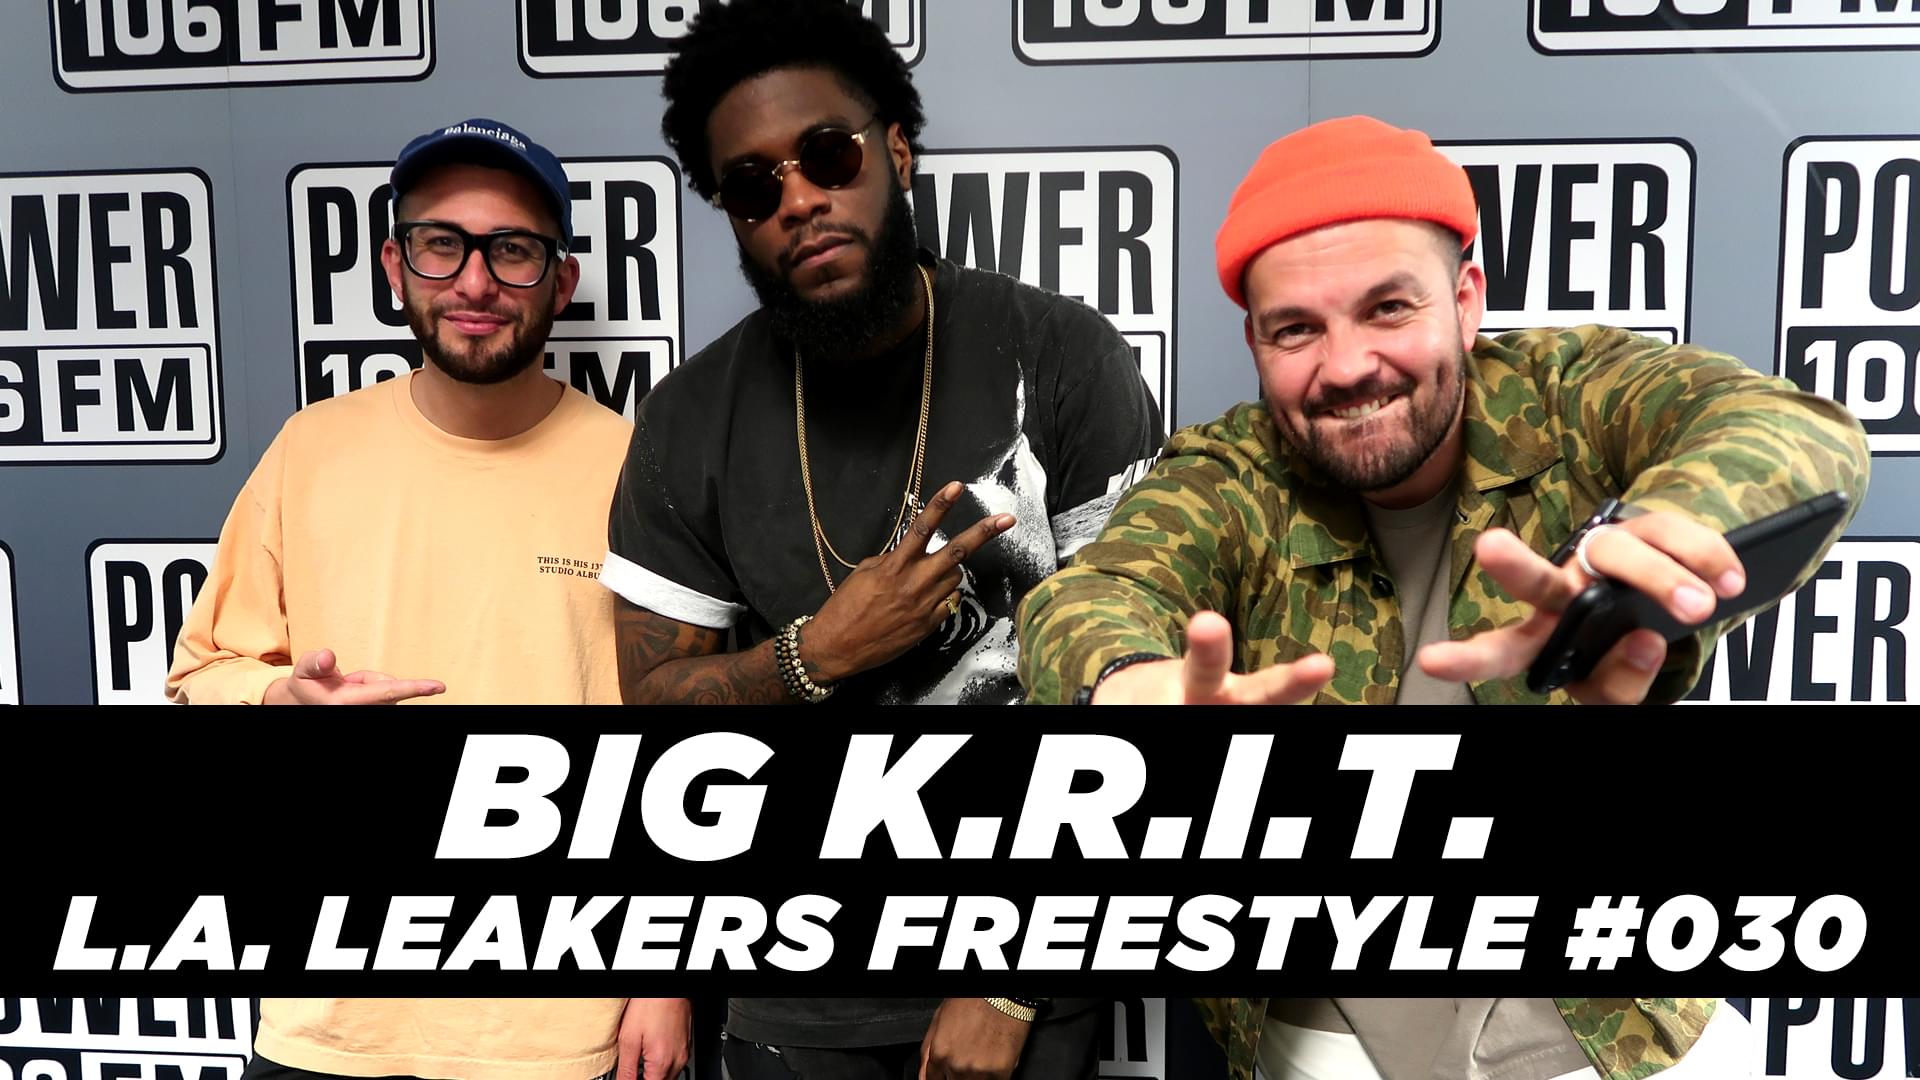 Big Krit Stops By The Liftoff To Spit Some Fire Bars With Justin Credible And Dj SourMilk